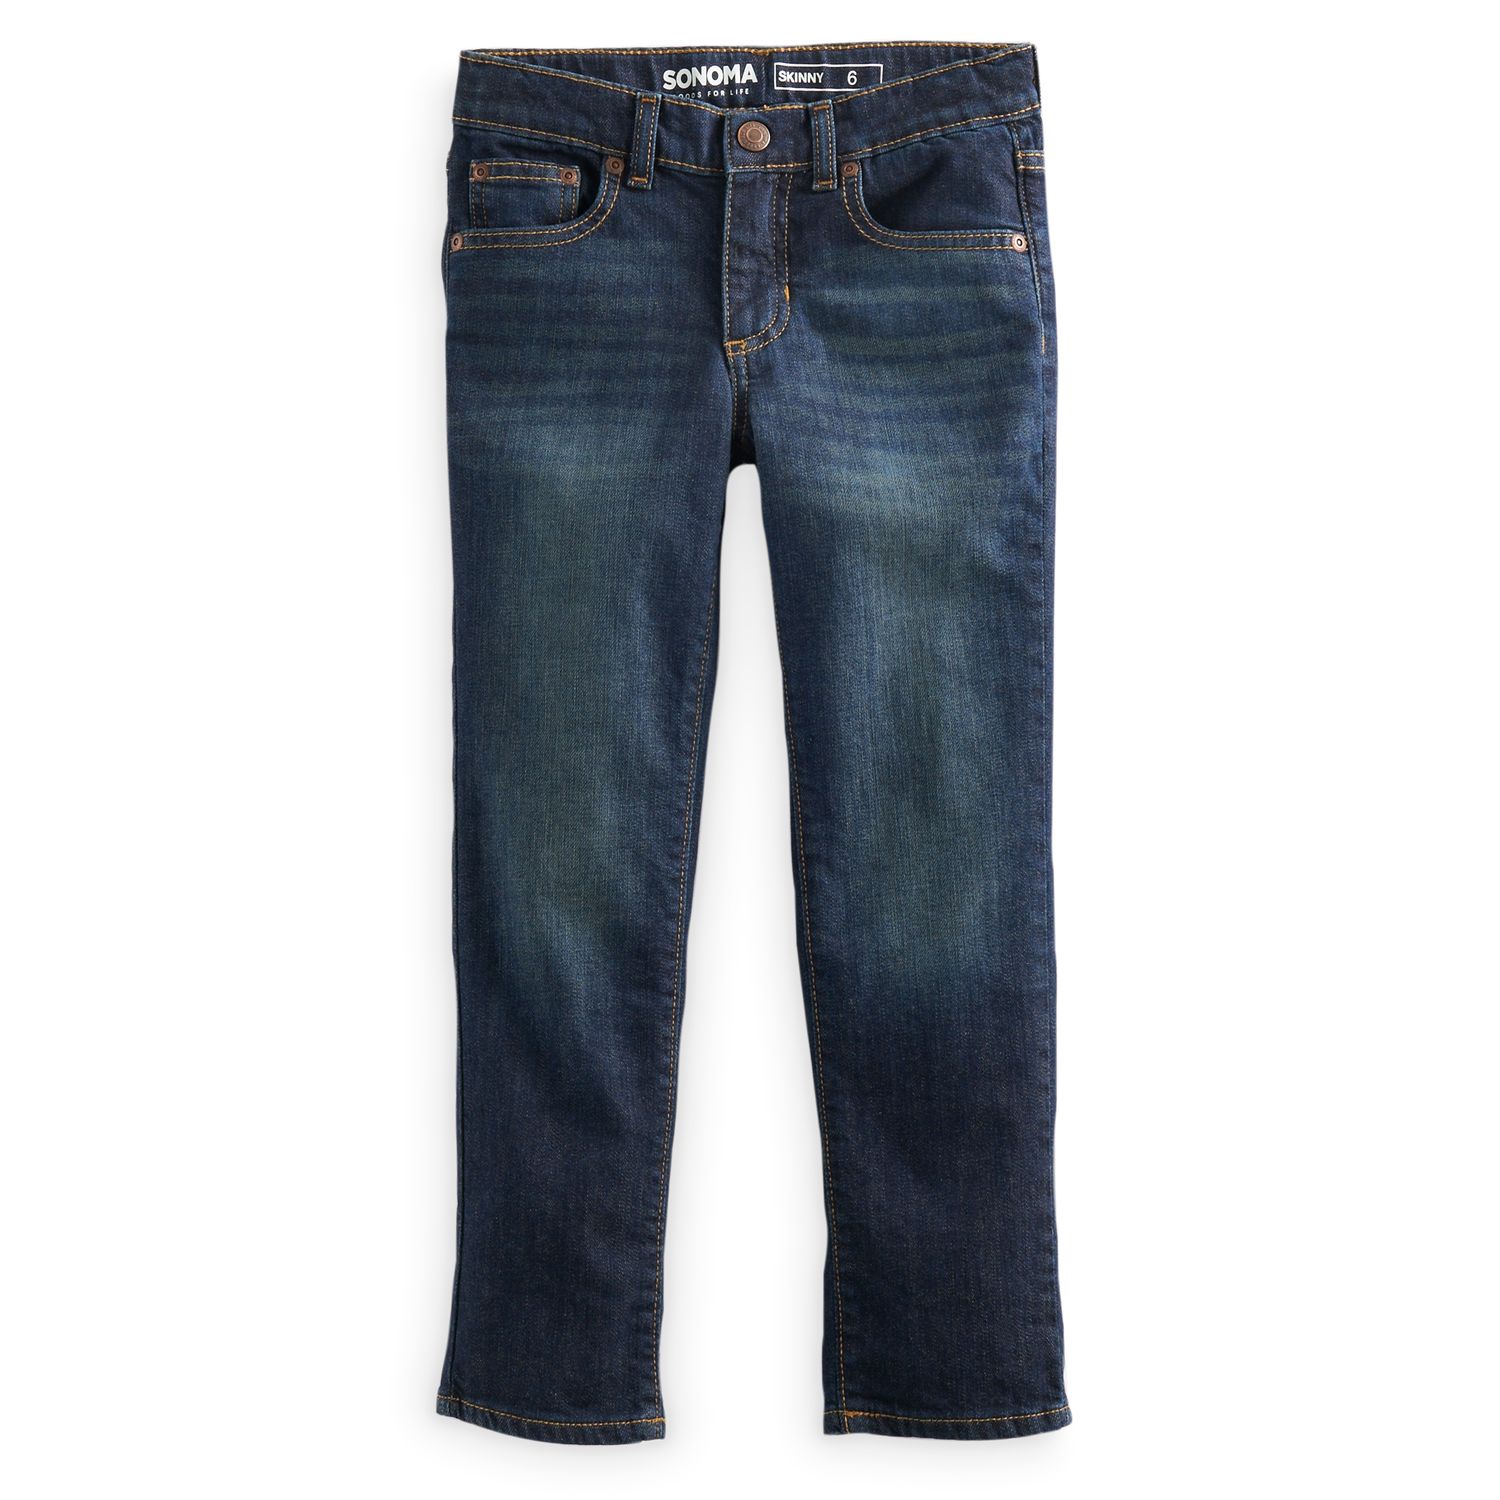 red stone jeans wholesale